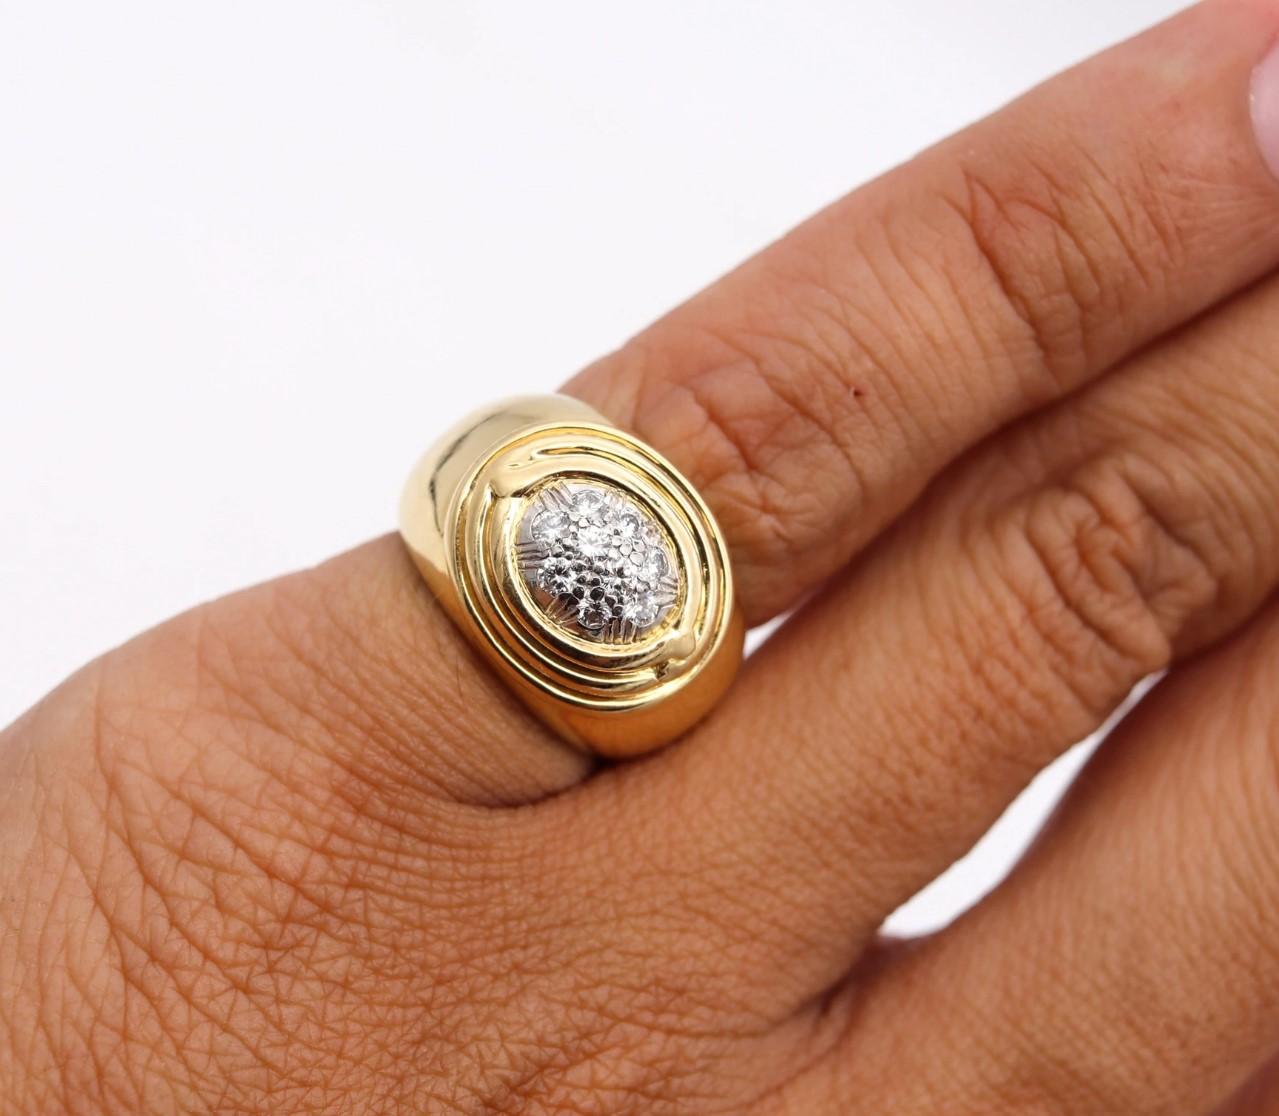 Women's Tiffany & Co. 1970 Schlumberger Rare Ring in 18Kt Gold Platinum with VS Diamonds